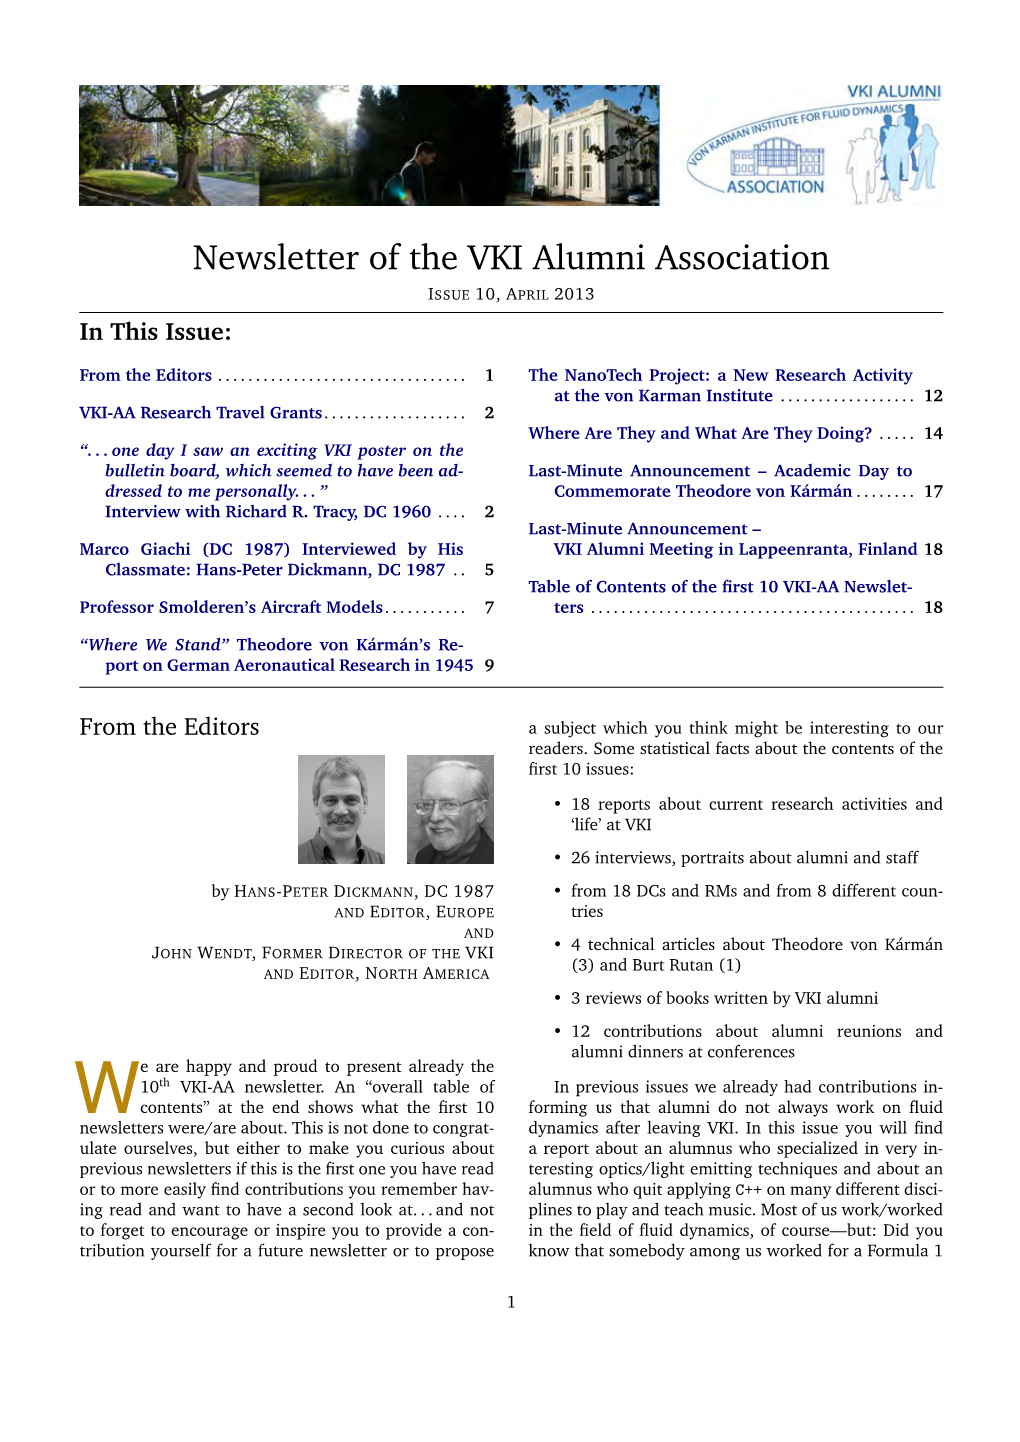 Newsletter of the VKI Alumni Association ISSUE 10, APRIL 2013 in This Issue